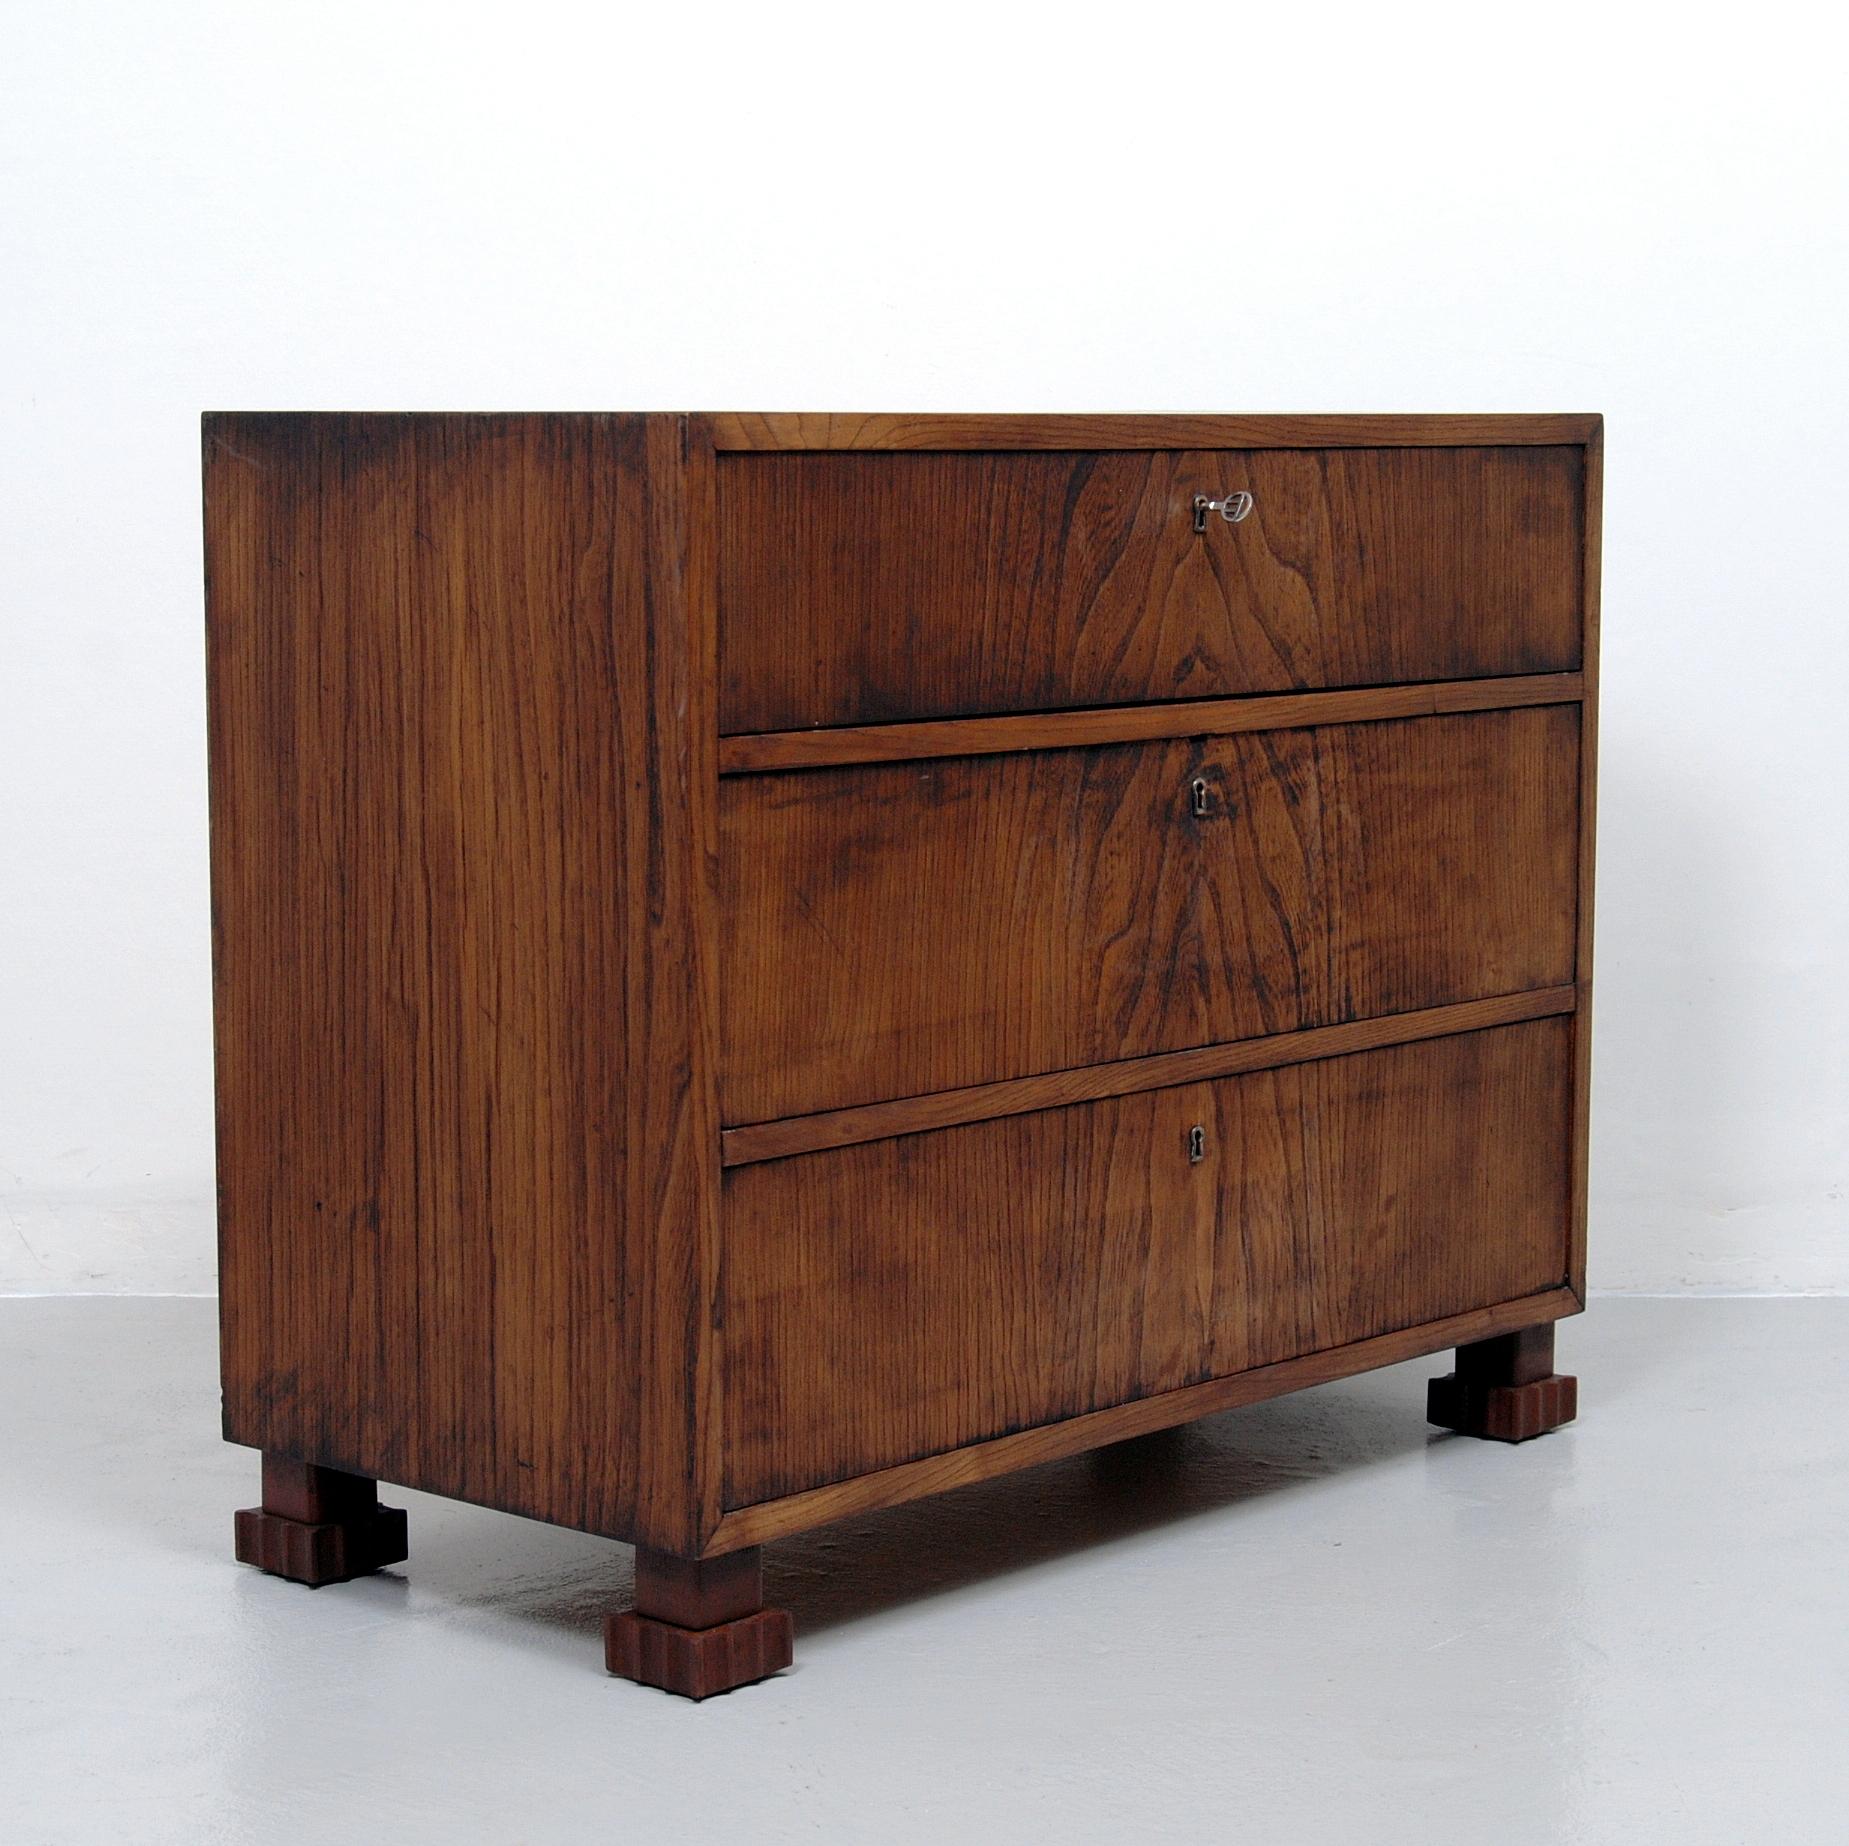 Chest of drawers in the Style of Axel Einar Hjorth, 1940s (Schwedisch)